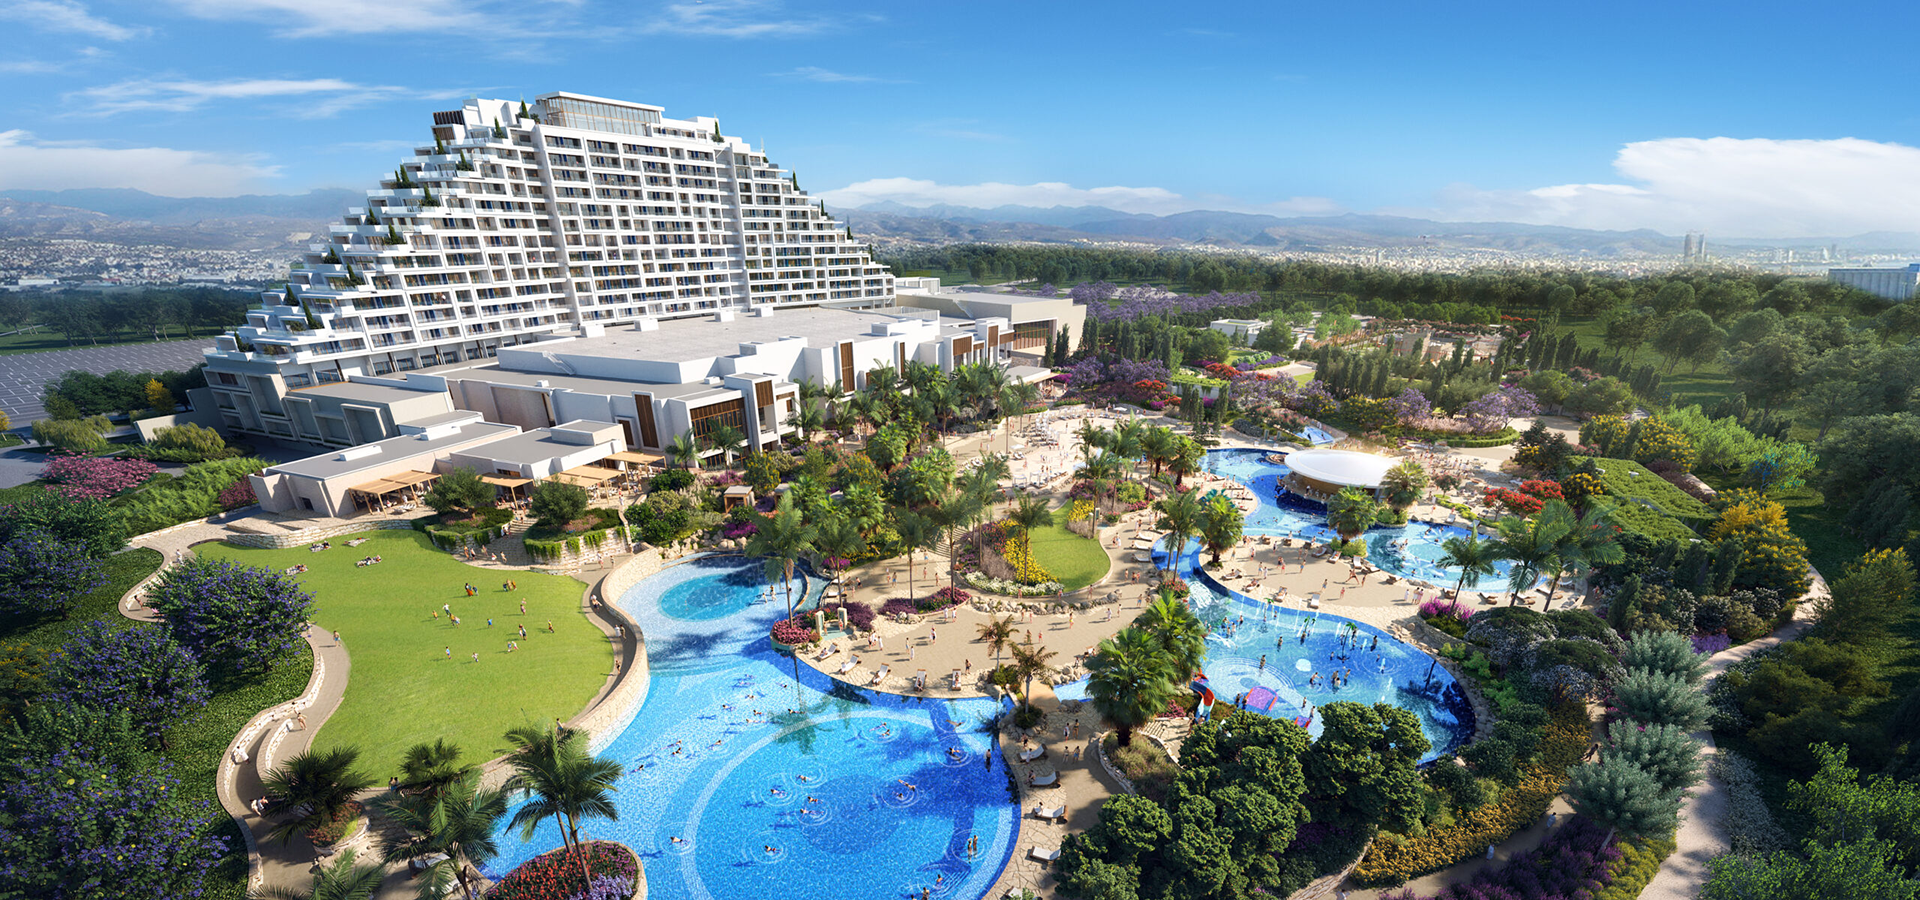 City of Dreams Mediterranean: Europe's first integrated casino resort to open in Cyprus